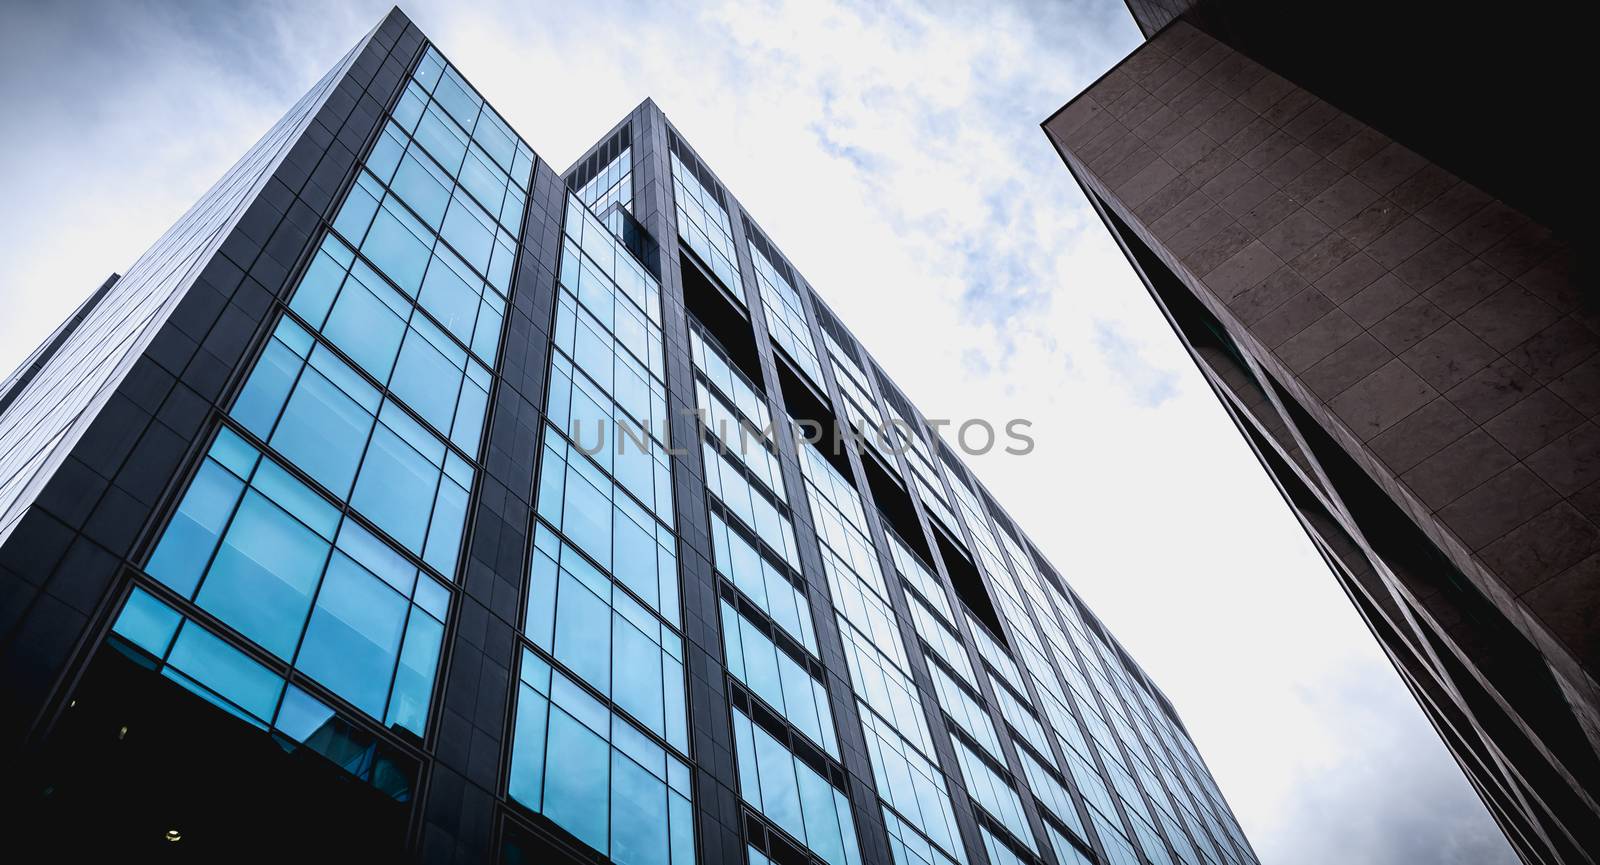 Dublin, Ireland - February 12, 2019: Architectural detail of the Irish headquarters building of the multinational Google on a winter day